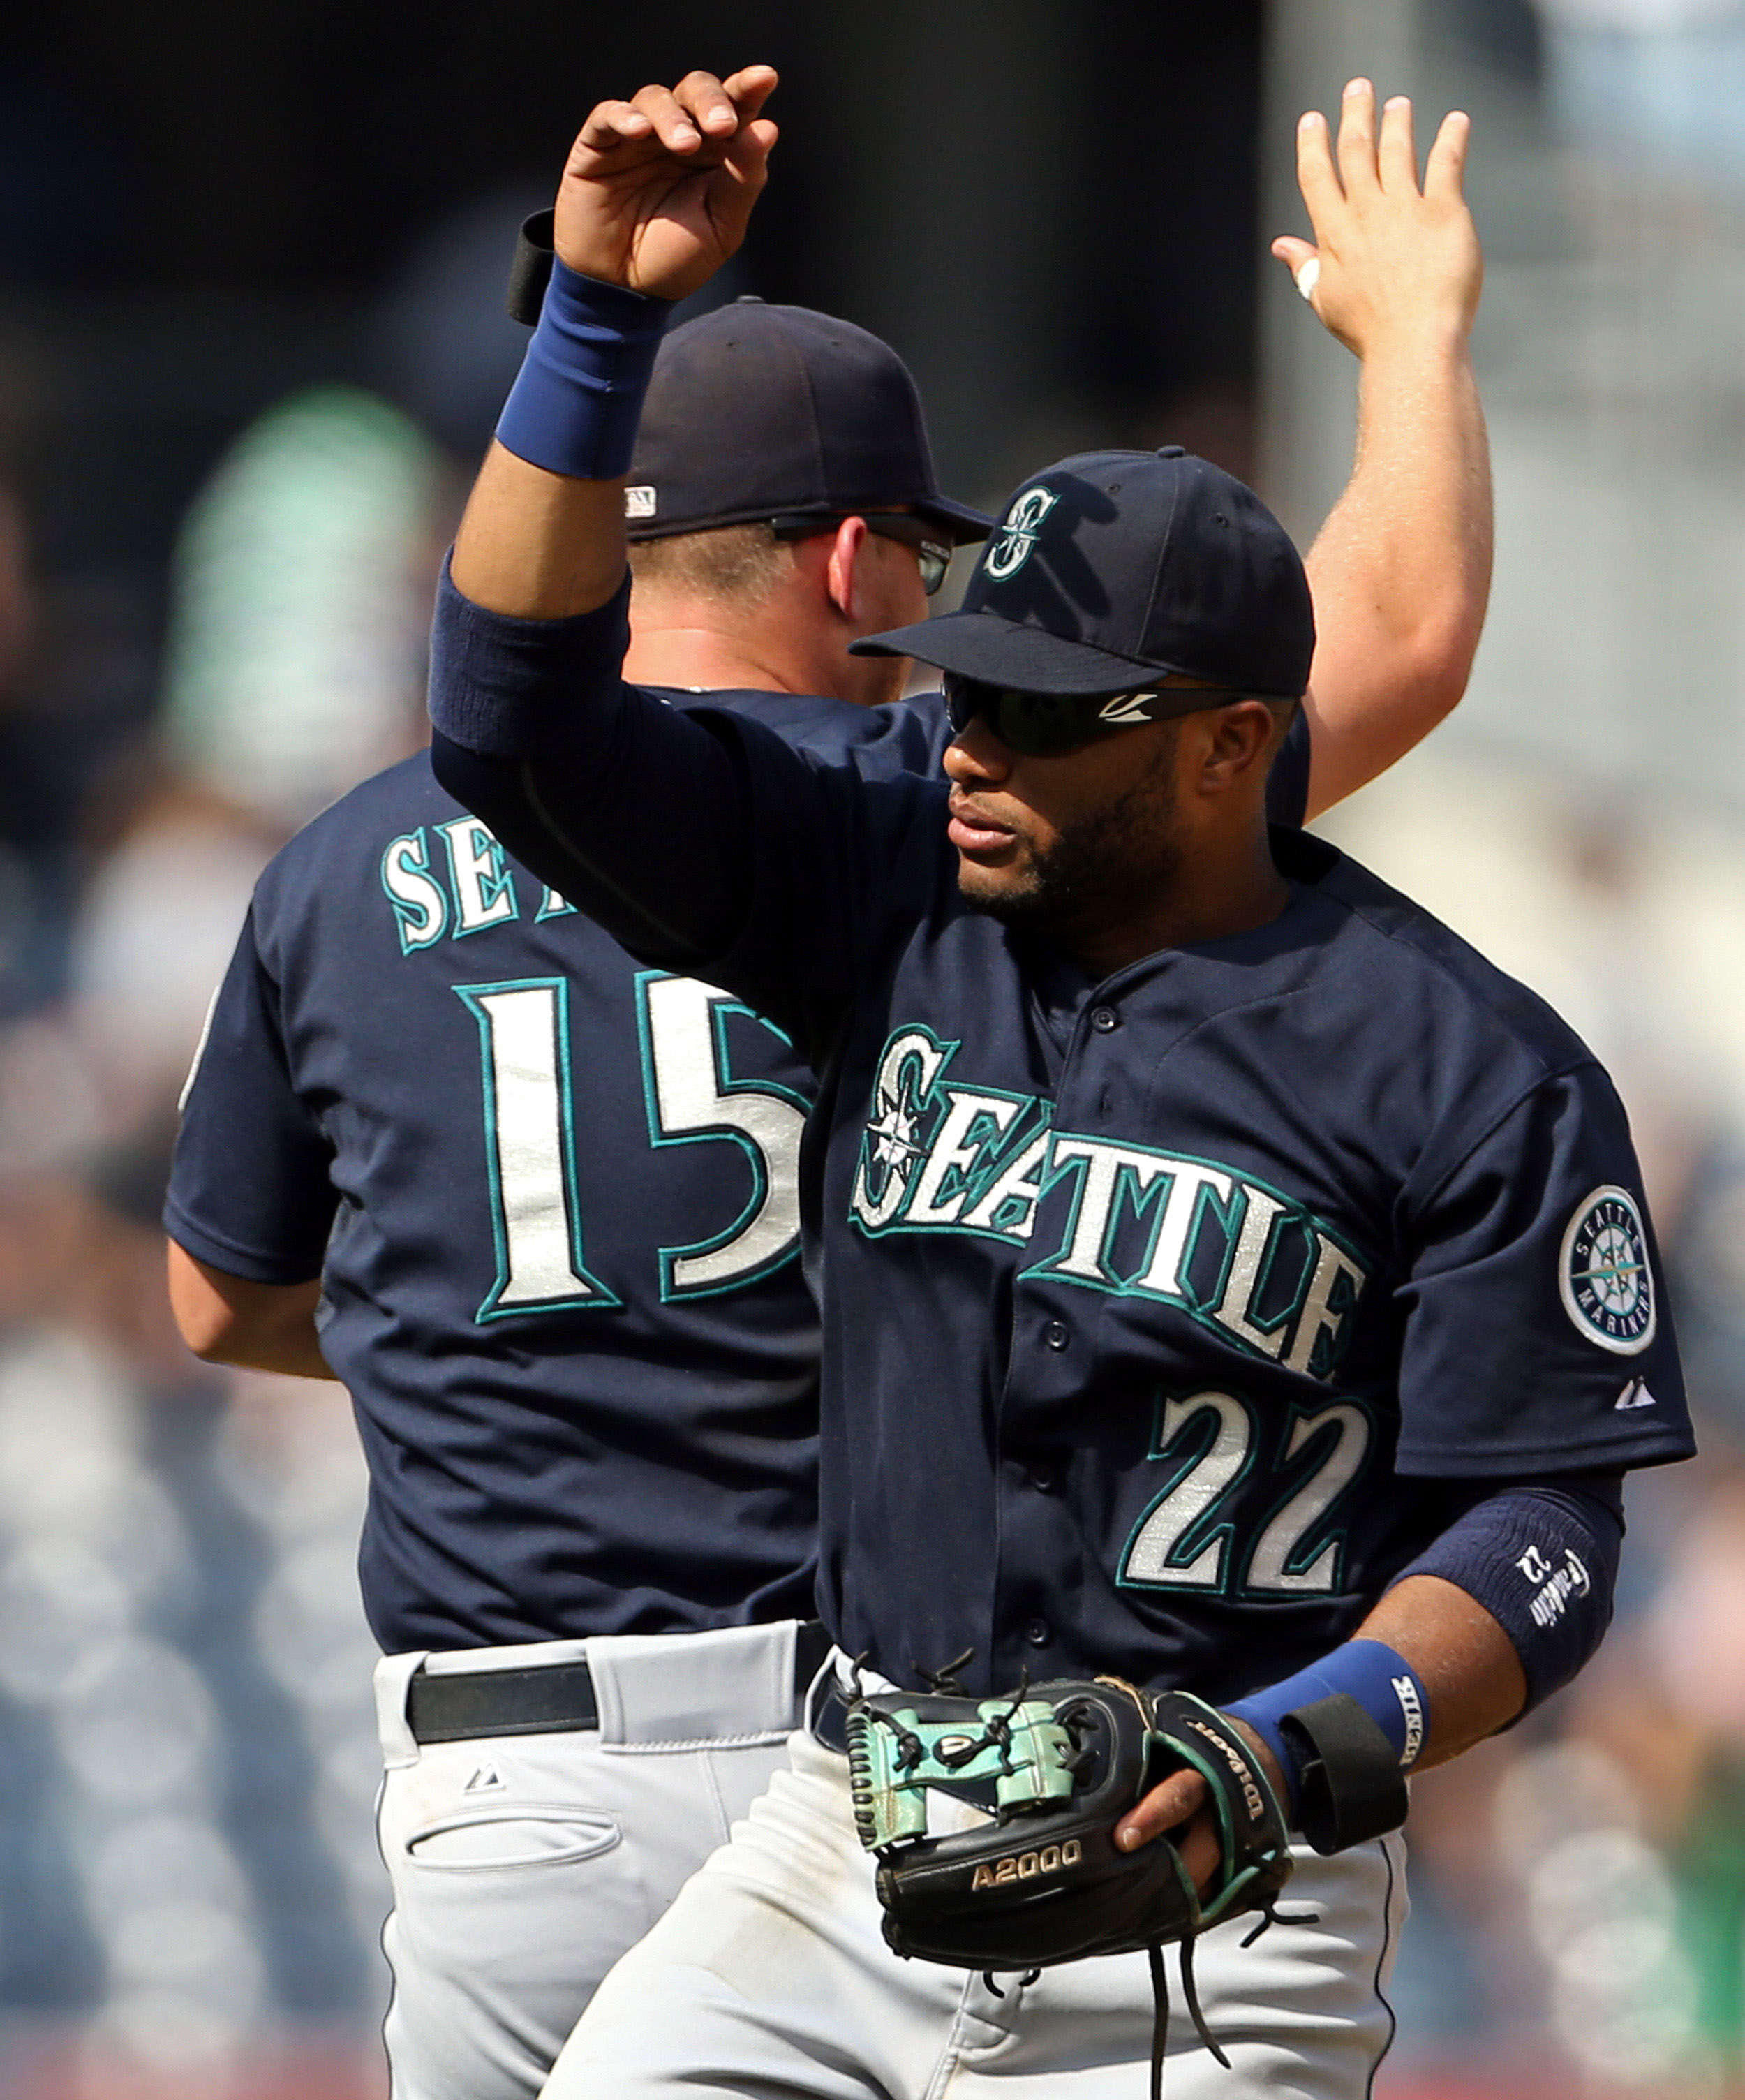 Cano homers twice for Mariners in 4-3 win over Yankees